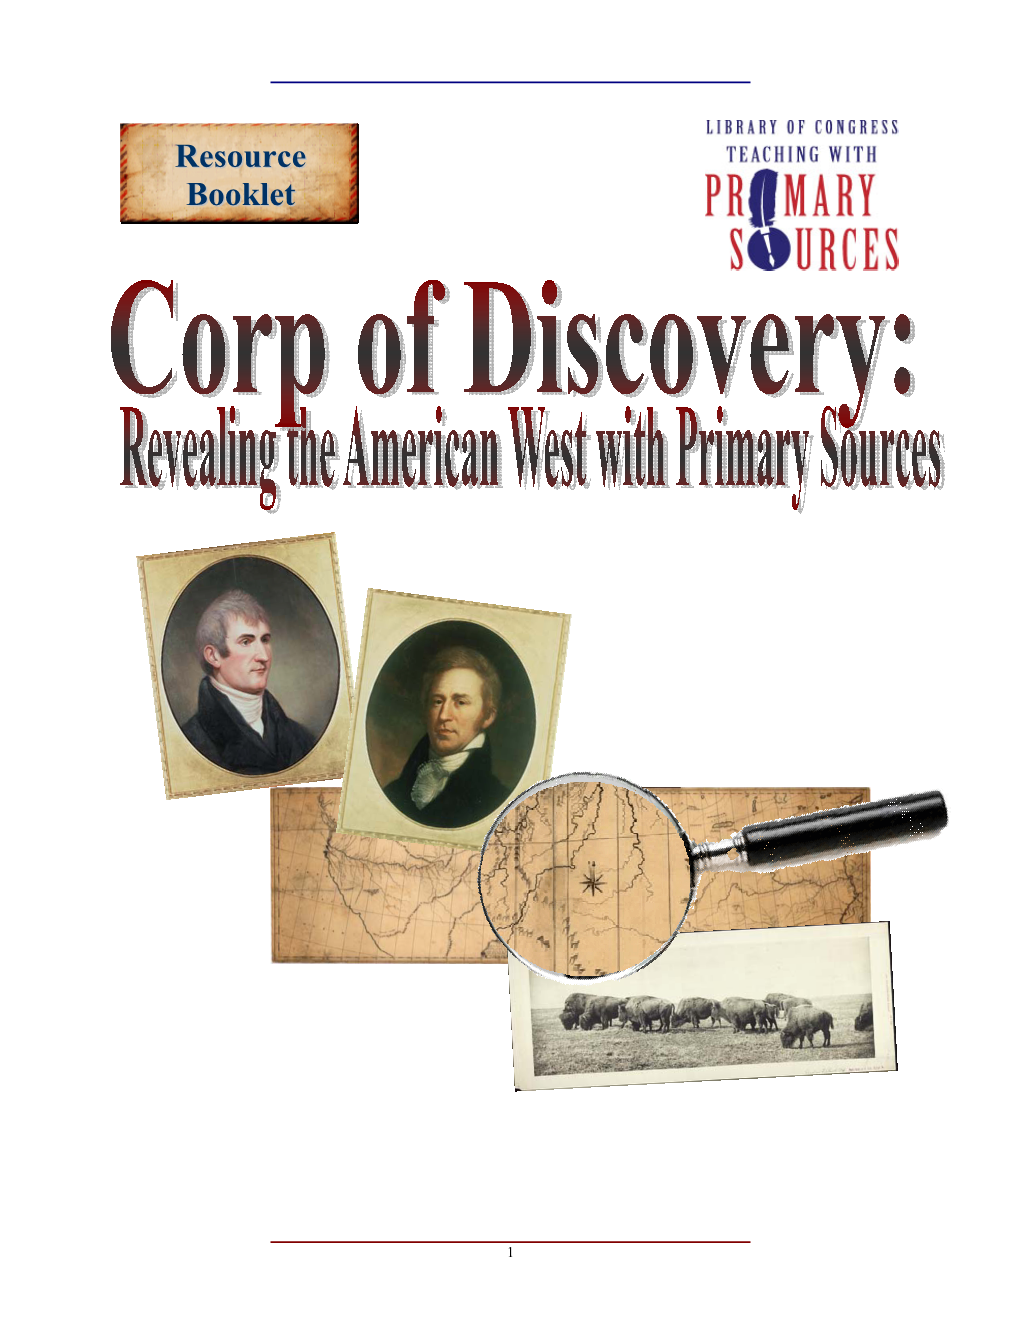 Revealing the American West Resource Booklet